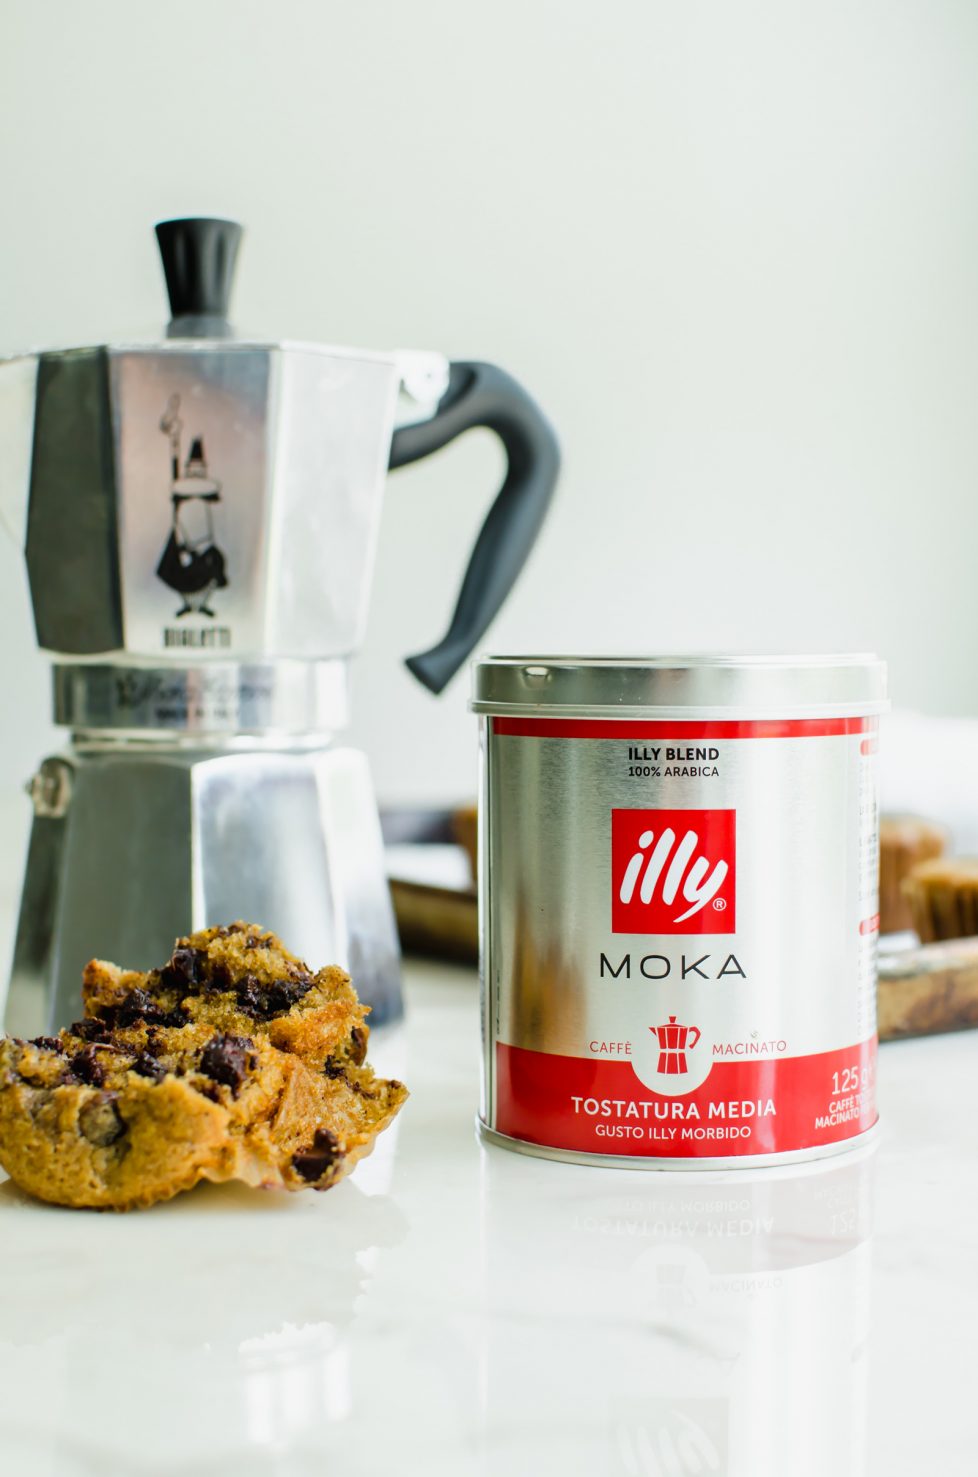 A straight-on shot of a can of Illy espresso, a stovetop coffee maker, and a chocolate chip muffin broken in half.